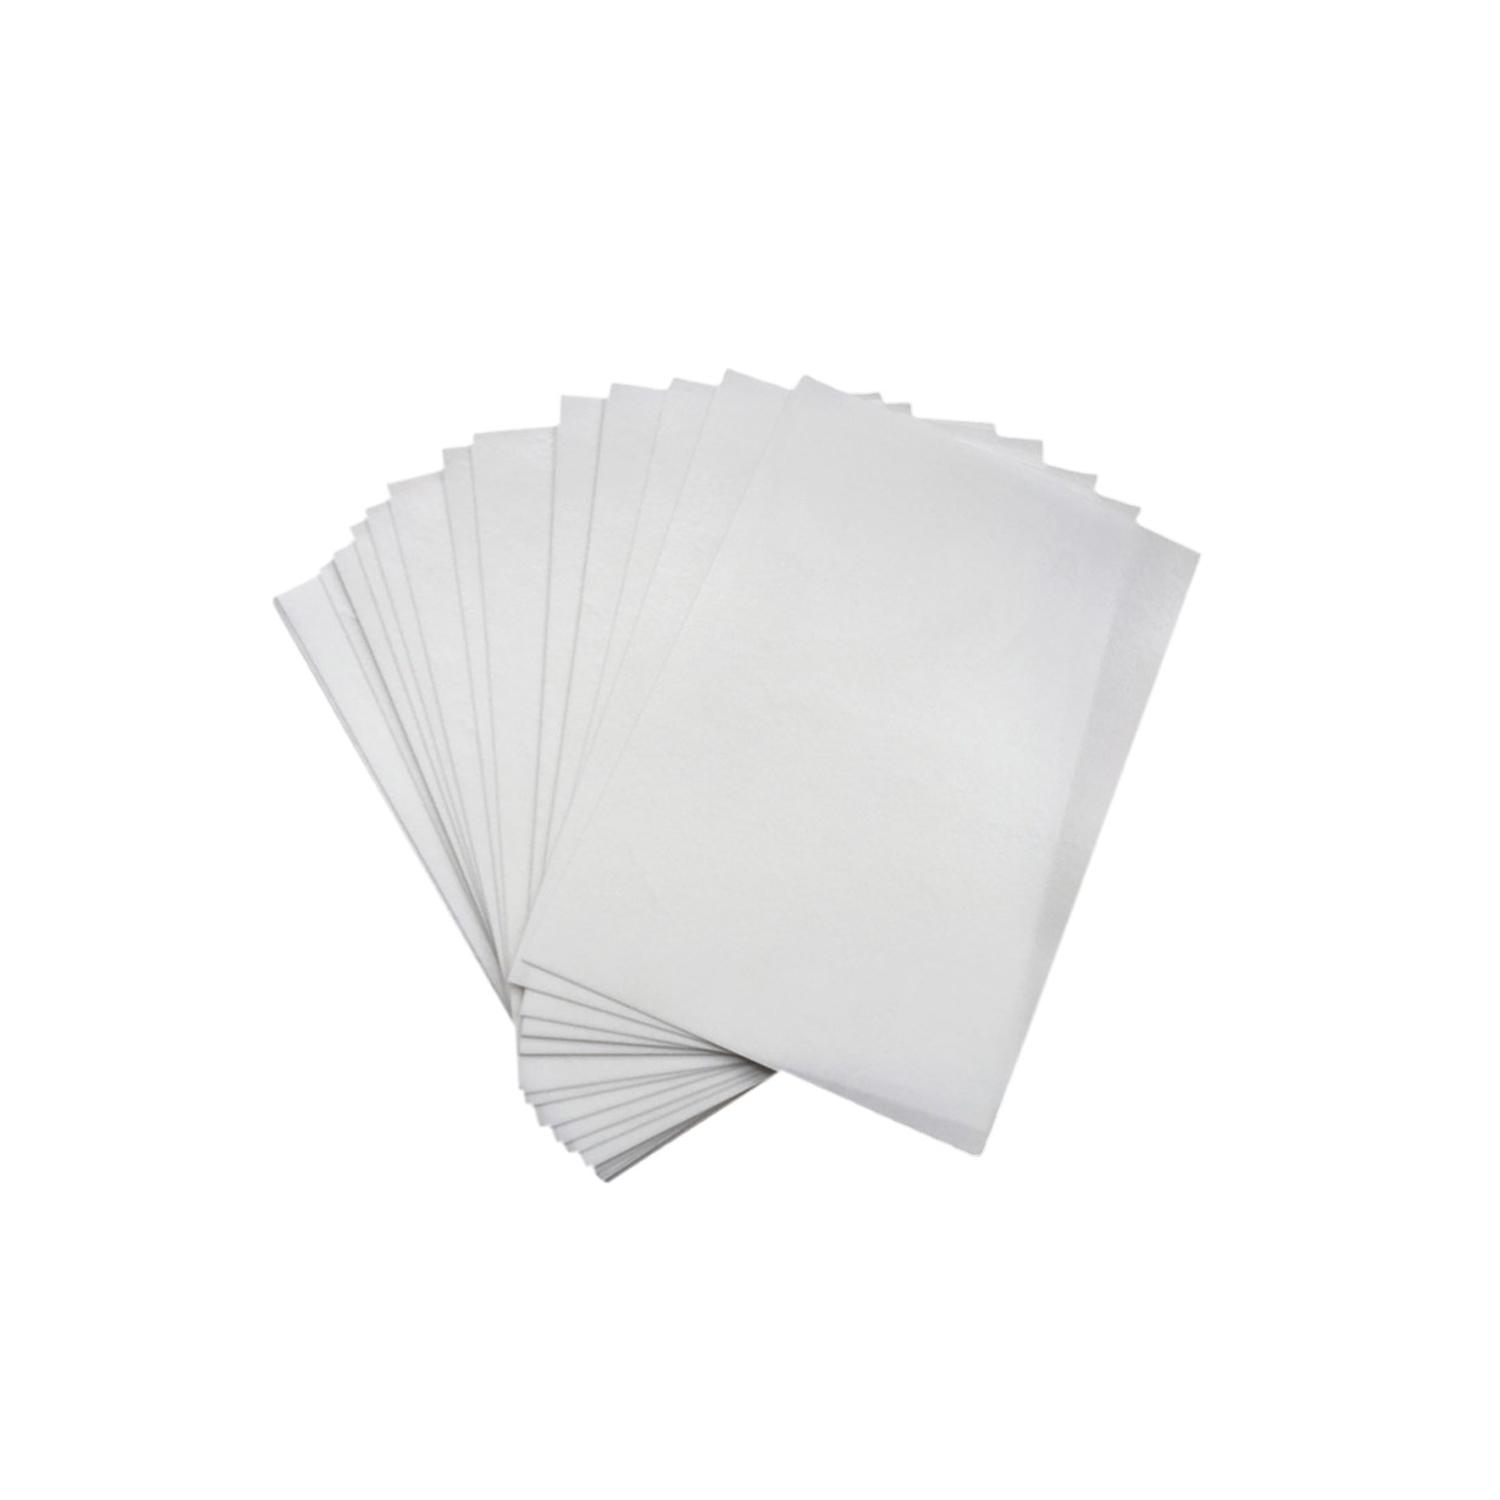 EDIBLE WAFER PAPER CARD A4 0.65MM 1PC